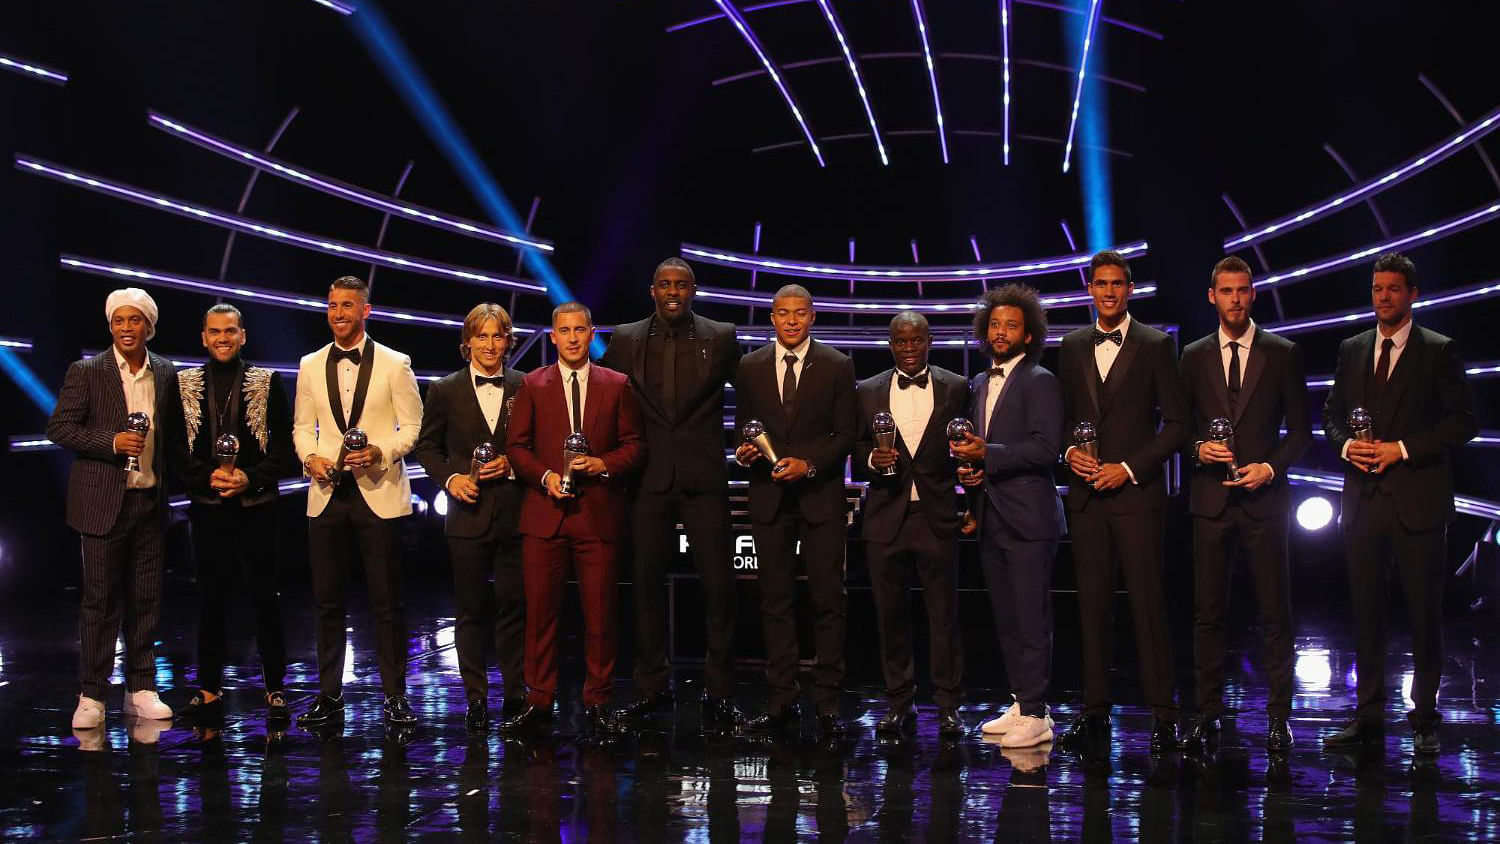 Host Idris Elba, center, poses with the 11 players of the top team with players David De Gea, Dani Alves, Marcelo, Sergio Ramos, Raphael Varane, Eden Hazard, N’Golo Kante, Luka Modric, Cristiano Ronaldo, Kylian Mbappe and Lionel Messi during the ceremony of the Best FIFA Football Awards.